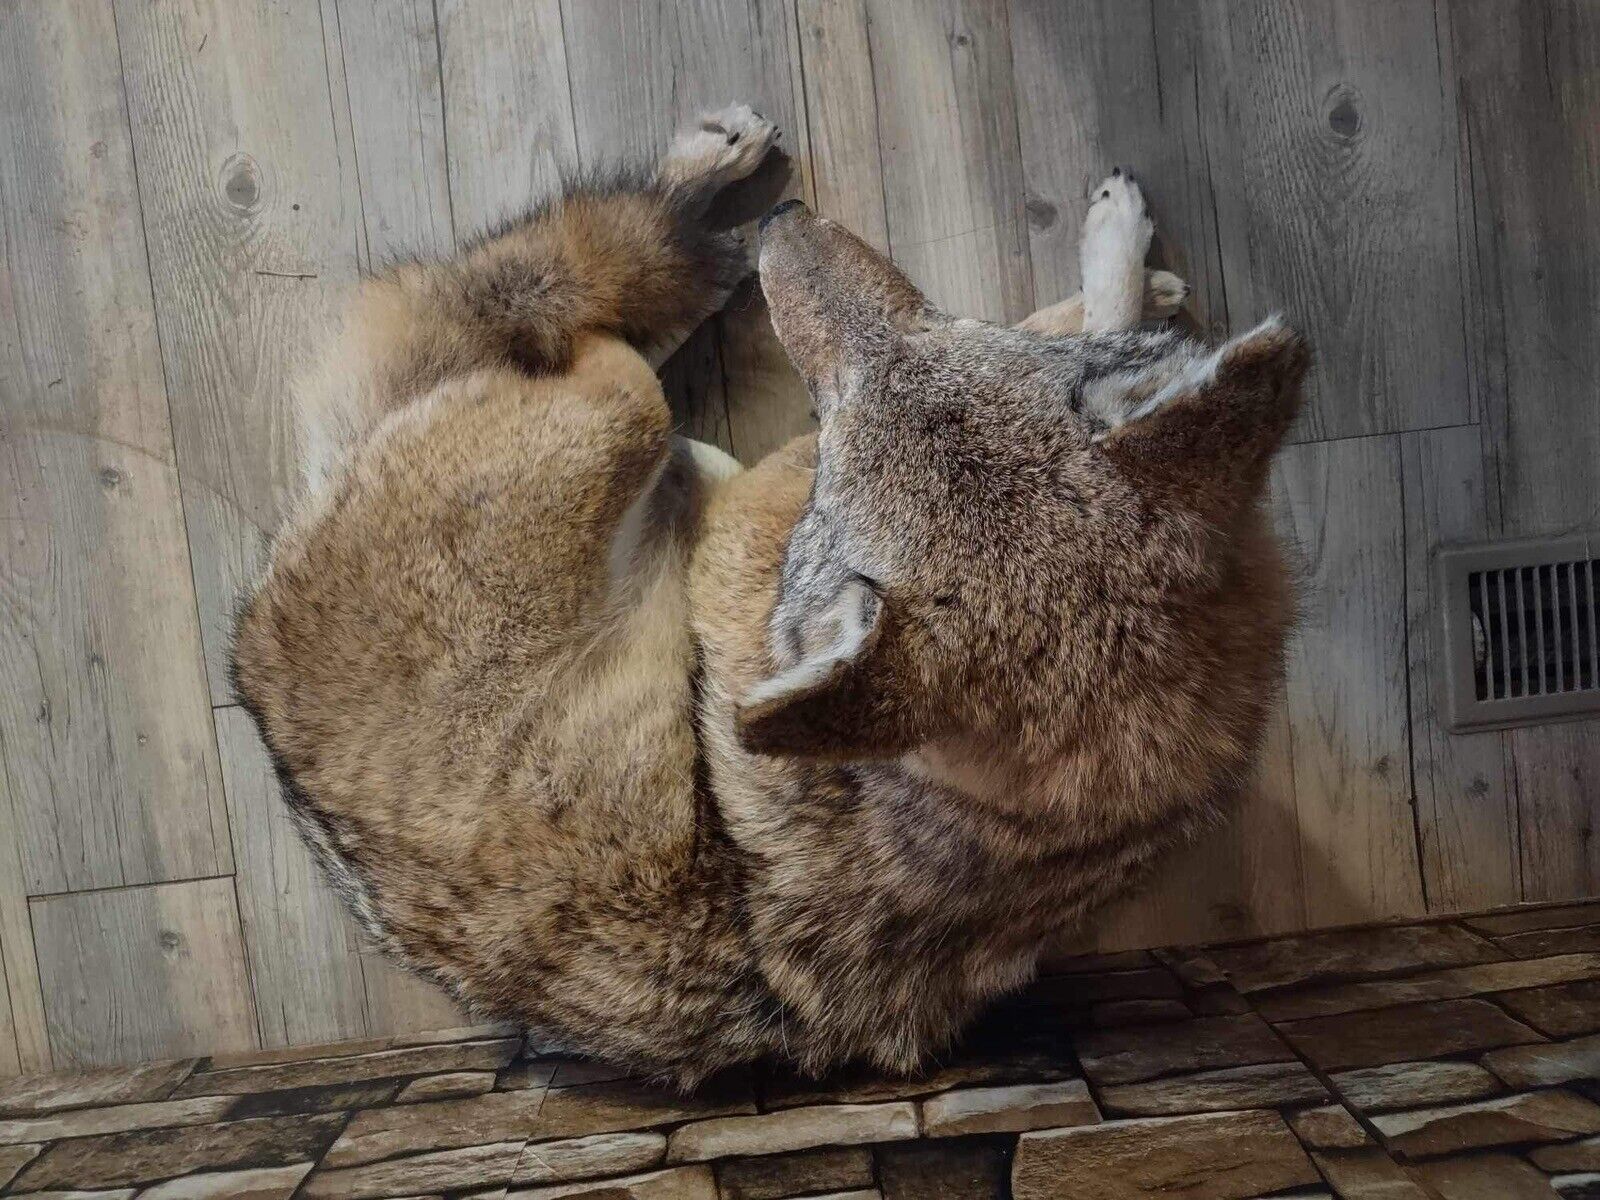 Coyote Taxidermy Custom Full Body Mount Home Camp Wall Decor Hunting Cabin